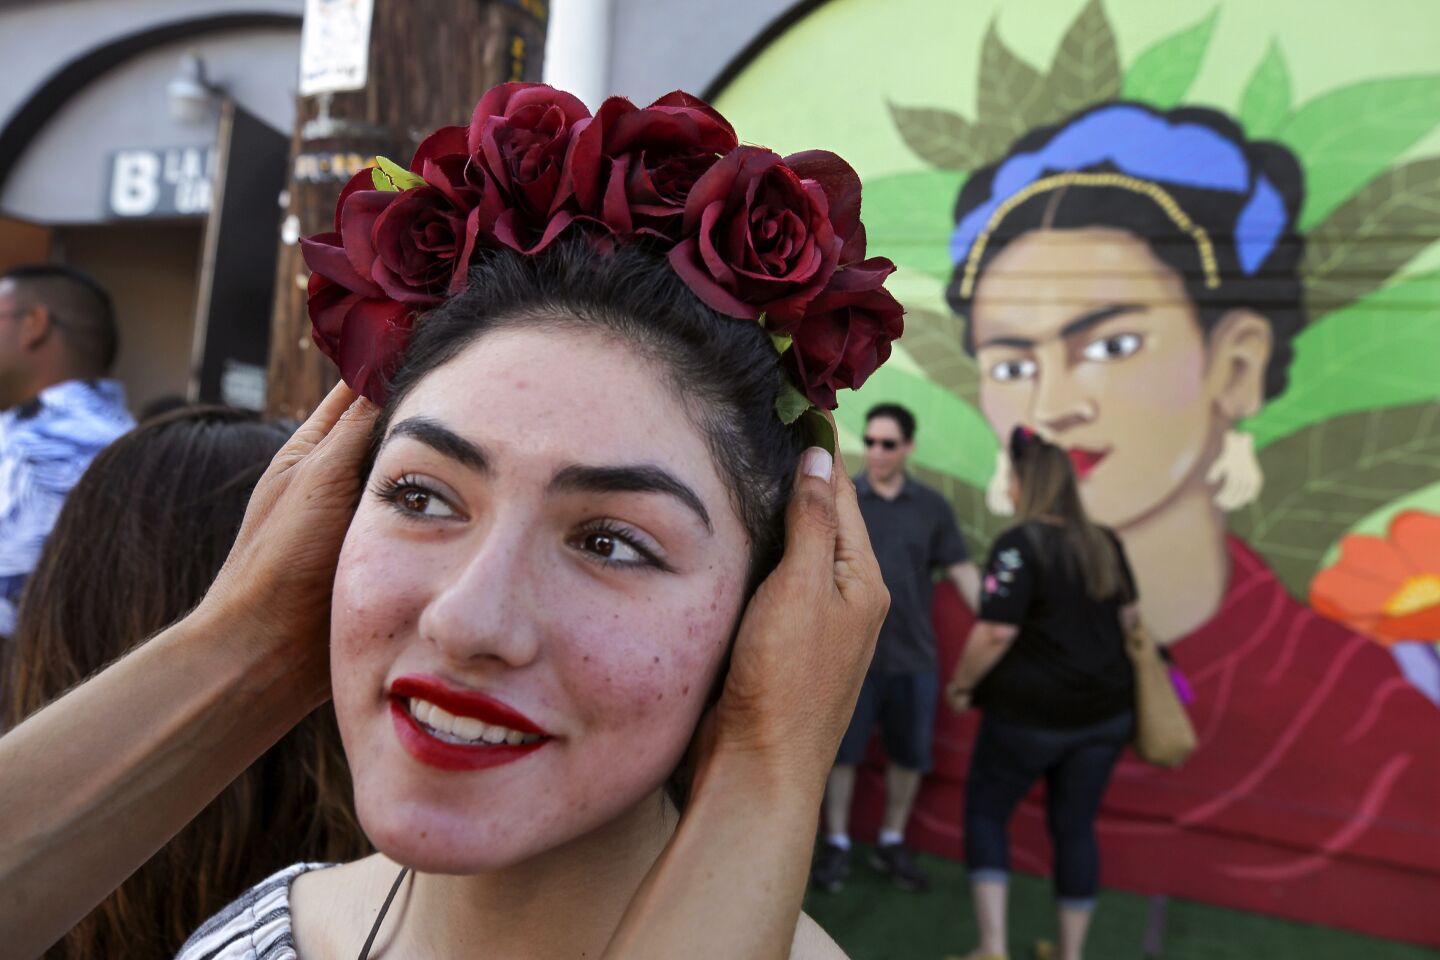 Frida Ramos, 16, stands in front of a large mural of Frida Kahlo, painted by artist and owner of the La Bodega Gallery Soni Lopez, as her mother Beatriz Ramos adjusts her Frida Kahlo style of flower crown while outside of the La Bodega Gallery during the 5th annual Friducha, a festival celebrating Mexican artist Frida Kahlo in Barrio Logan on Saturday, July 6, 2019 in San Diego, California.